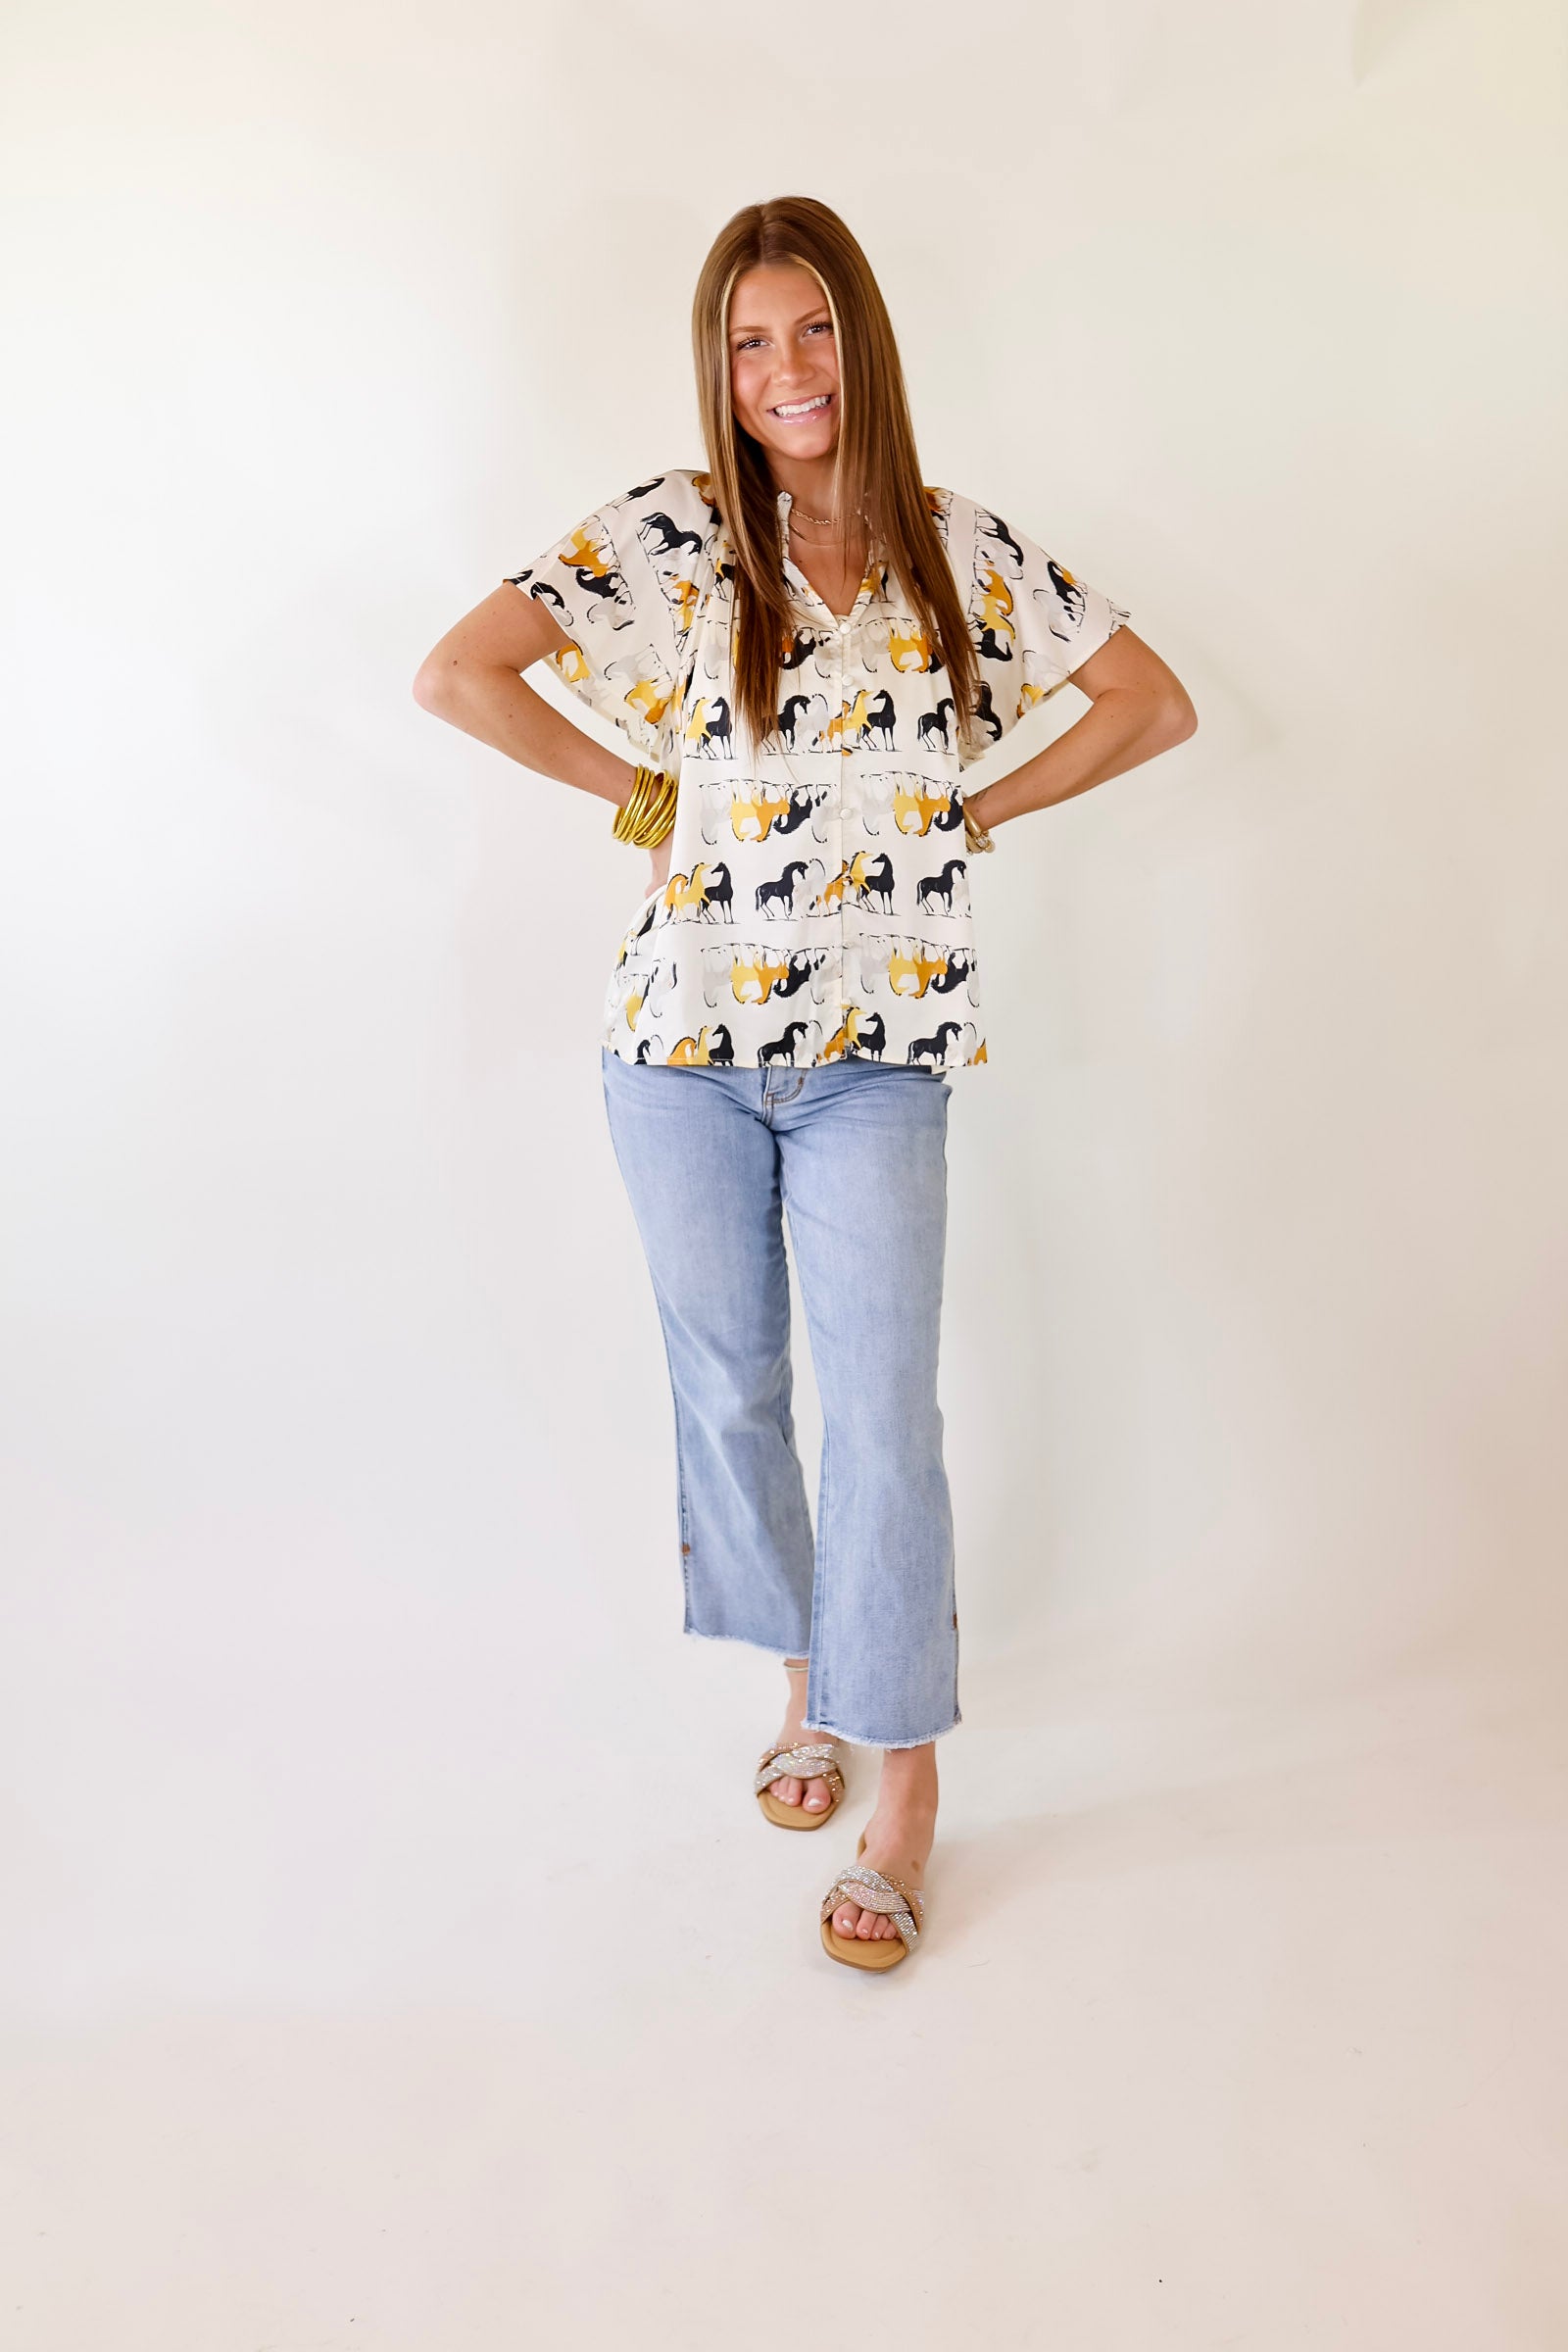 Away We Go Button Up Horse Print Shirt in Ivory - Giddy Up Glamour Boutique